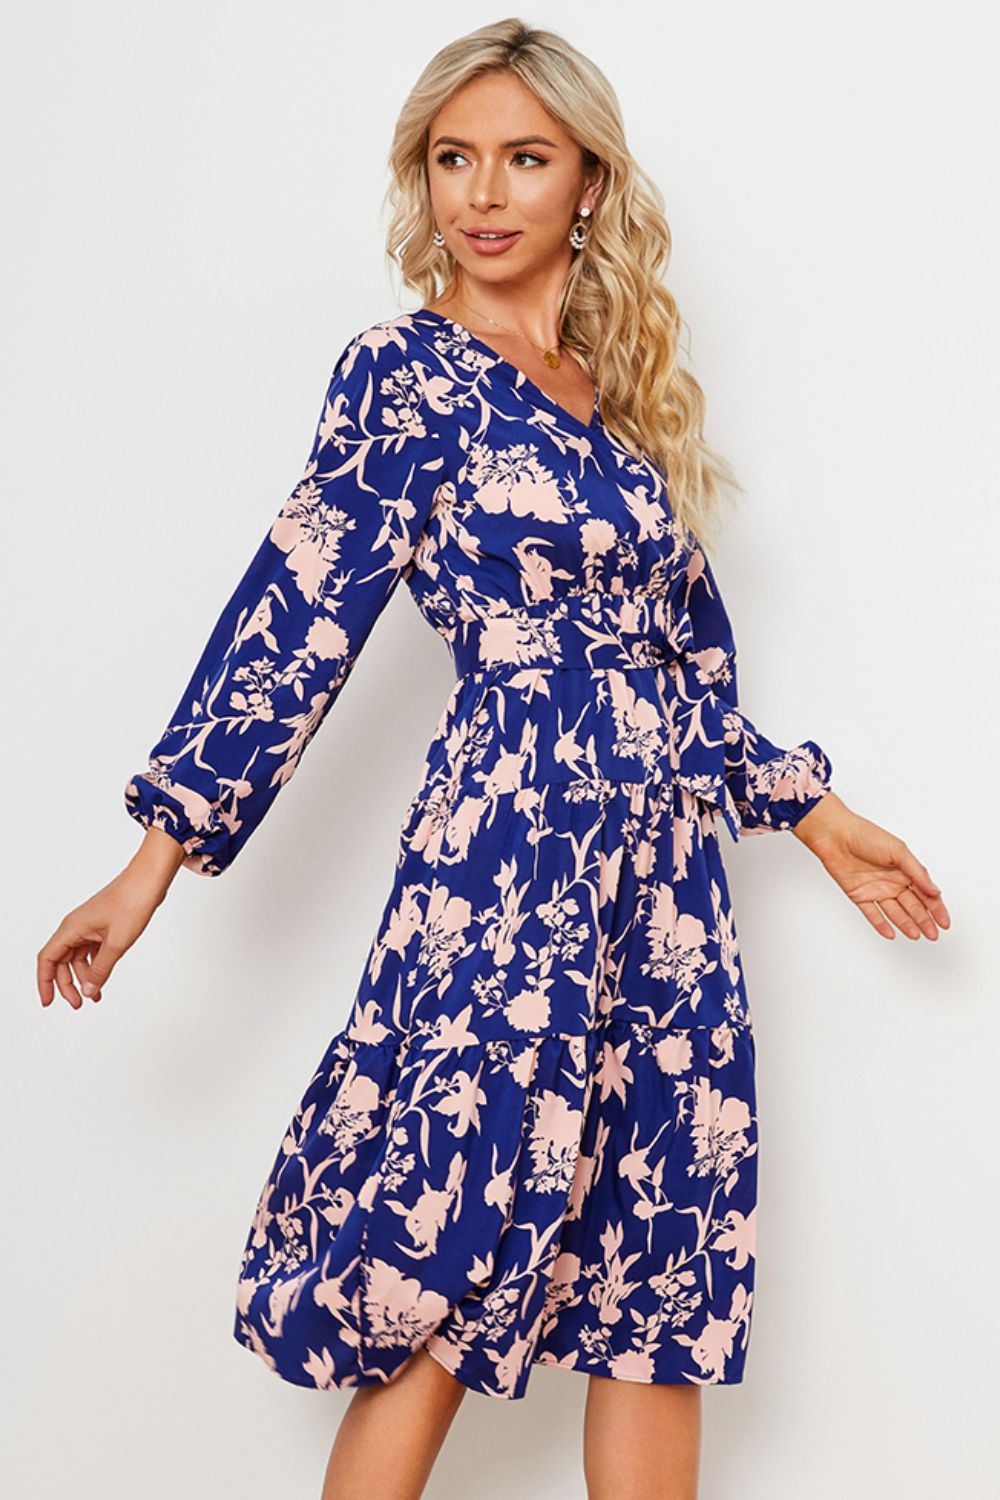 Enchanted Wildflowers - Unleash Your Inner Goddess with the Ethereal Floral Belted Tiered Midi Dress - Let the Magic of Wildflowers Transport You to a World of Romance and Wonder. - Guy Christopher